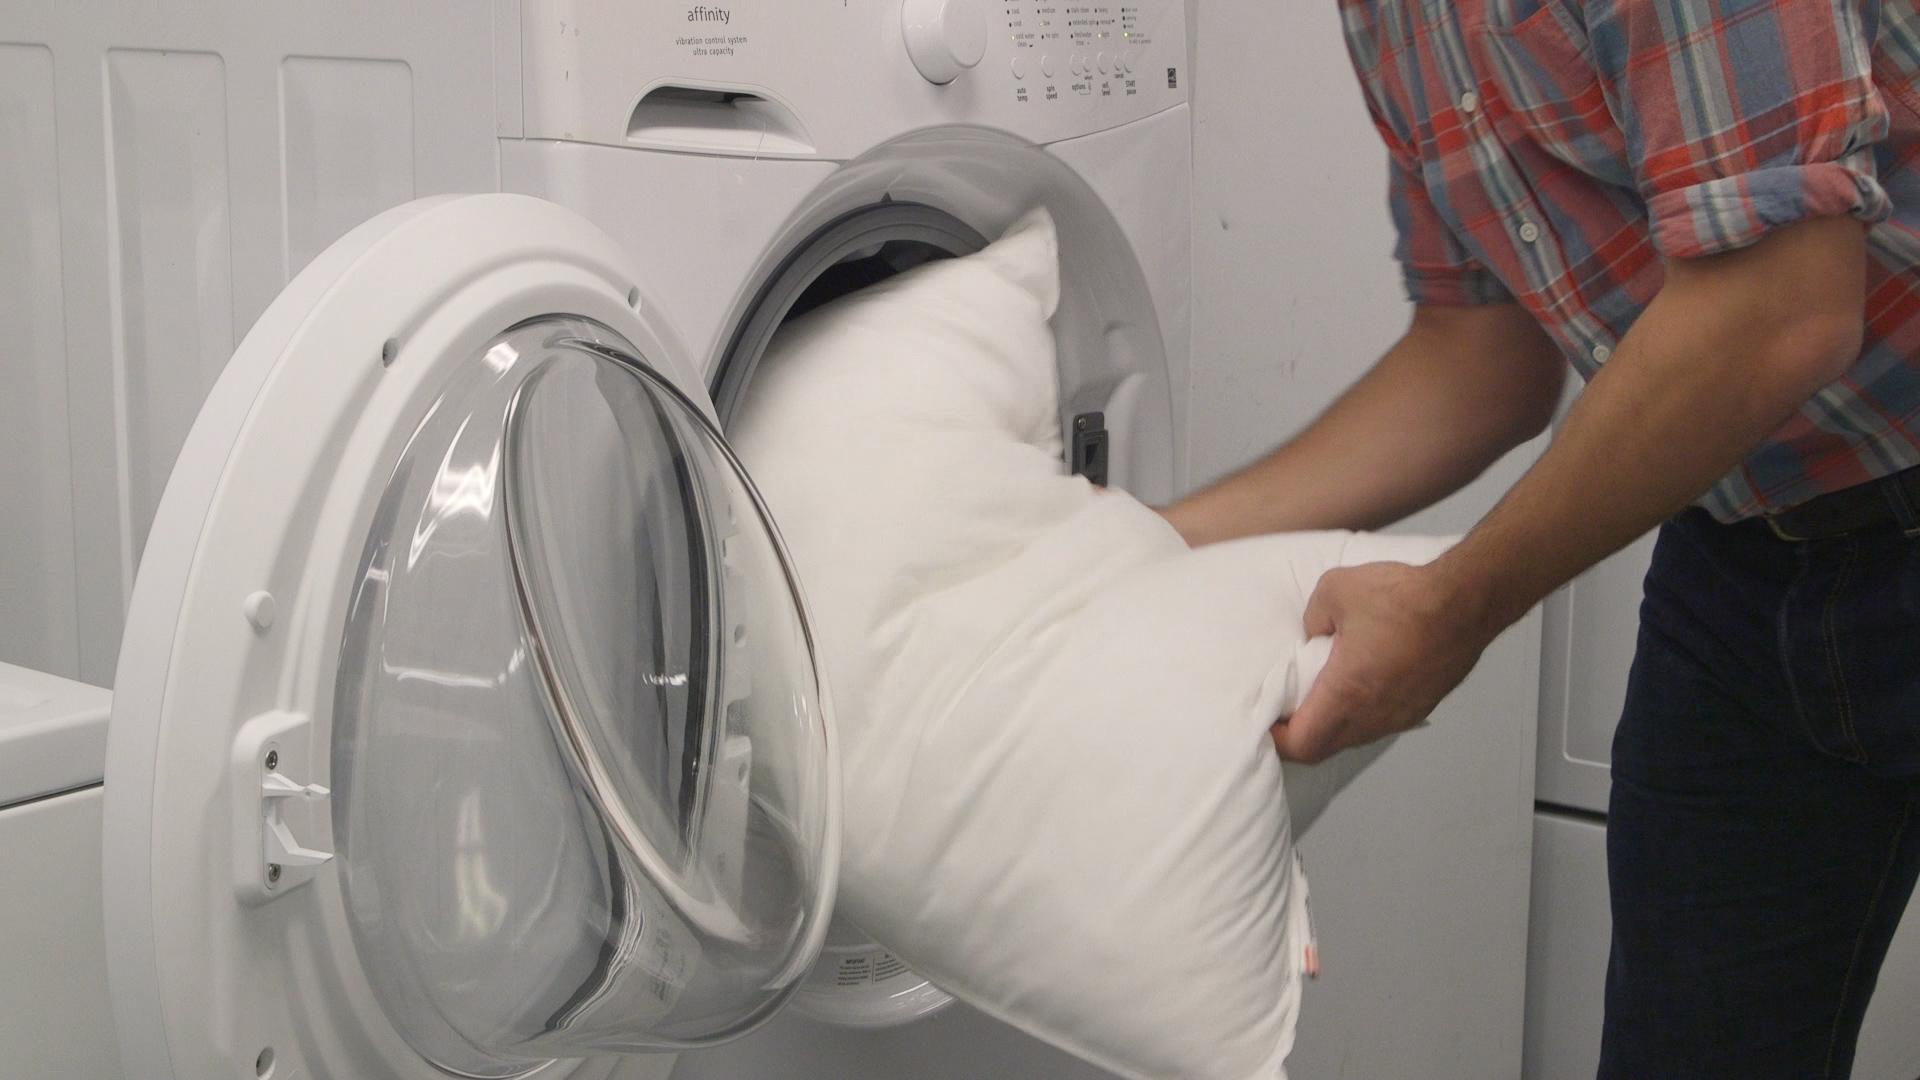 How To Properly Wash And Care For Pillows.